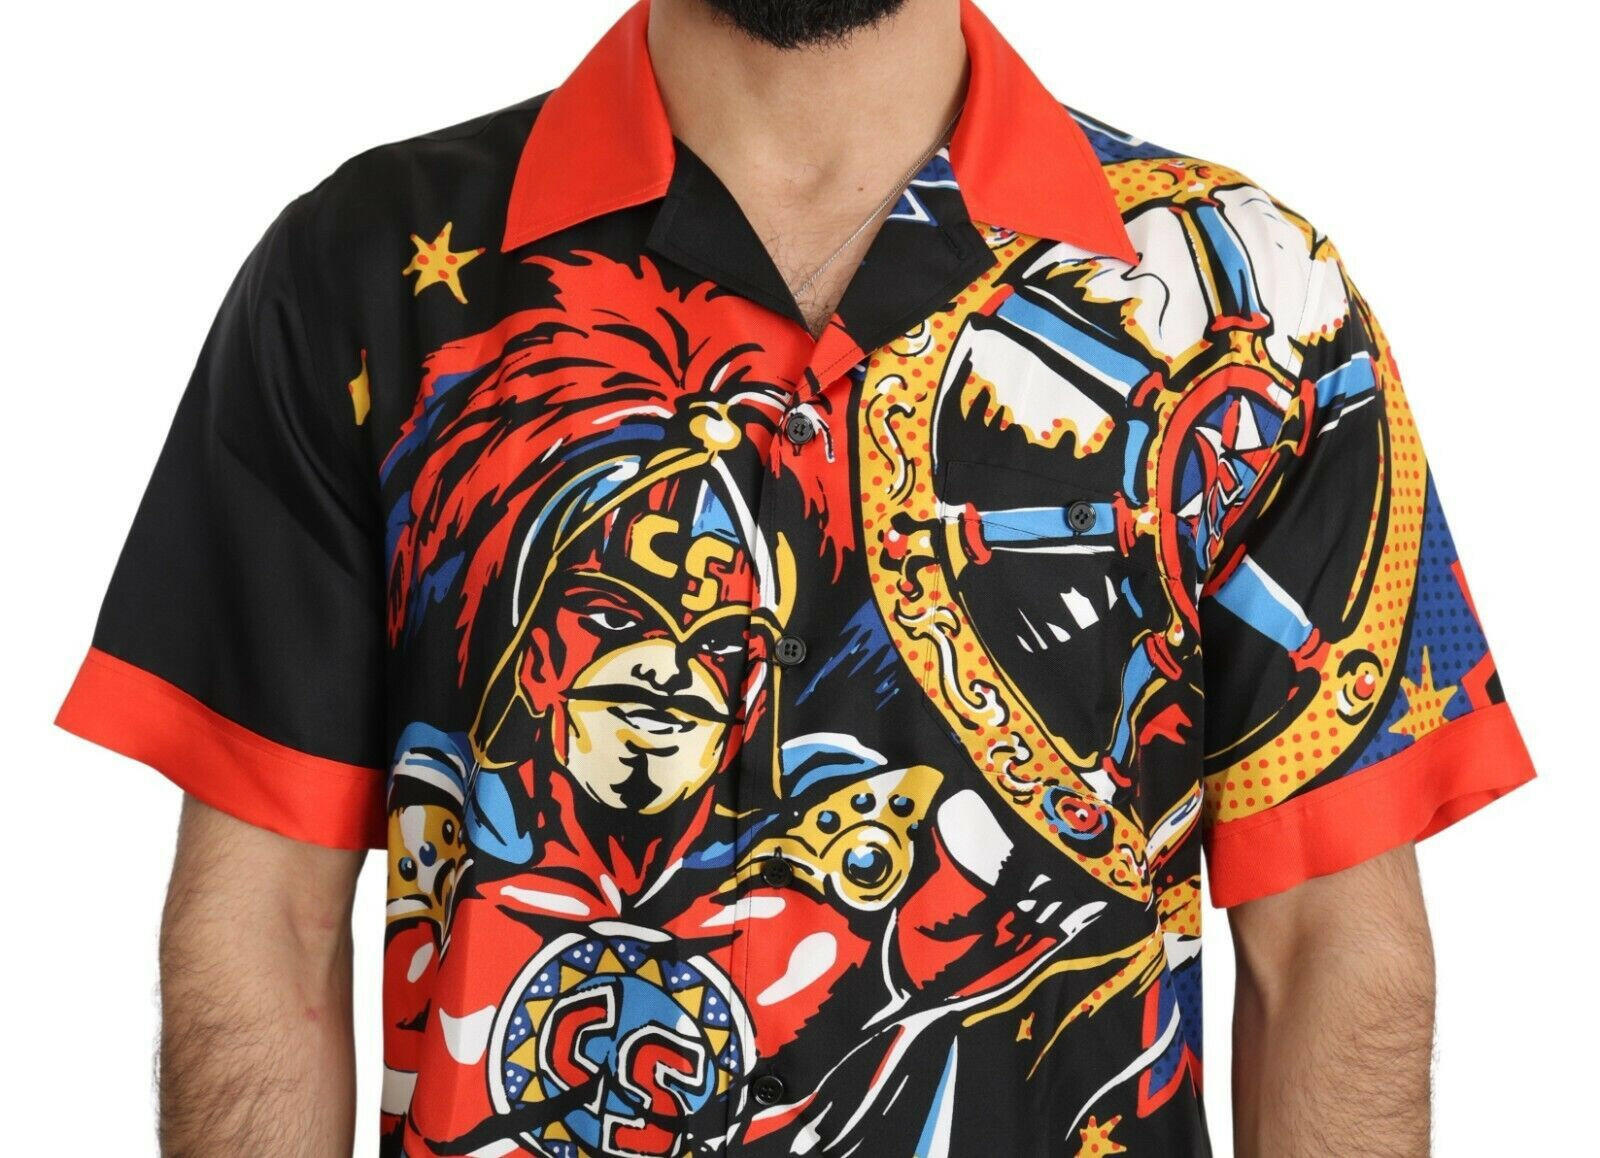 Dolce & Gabbana Multicolor Printed Short Sleeves Casual Shirt - GENUINE AUTHENTIC BRAND LLC  